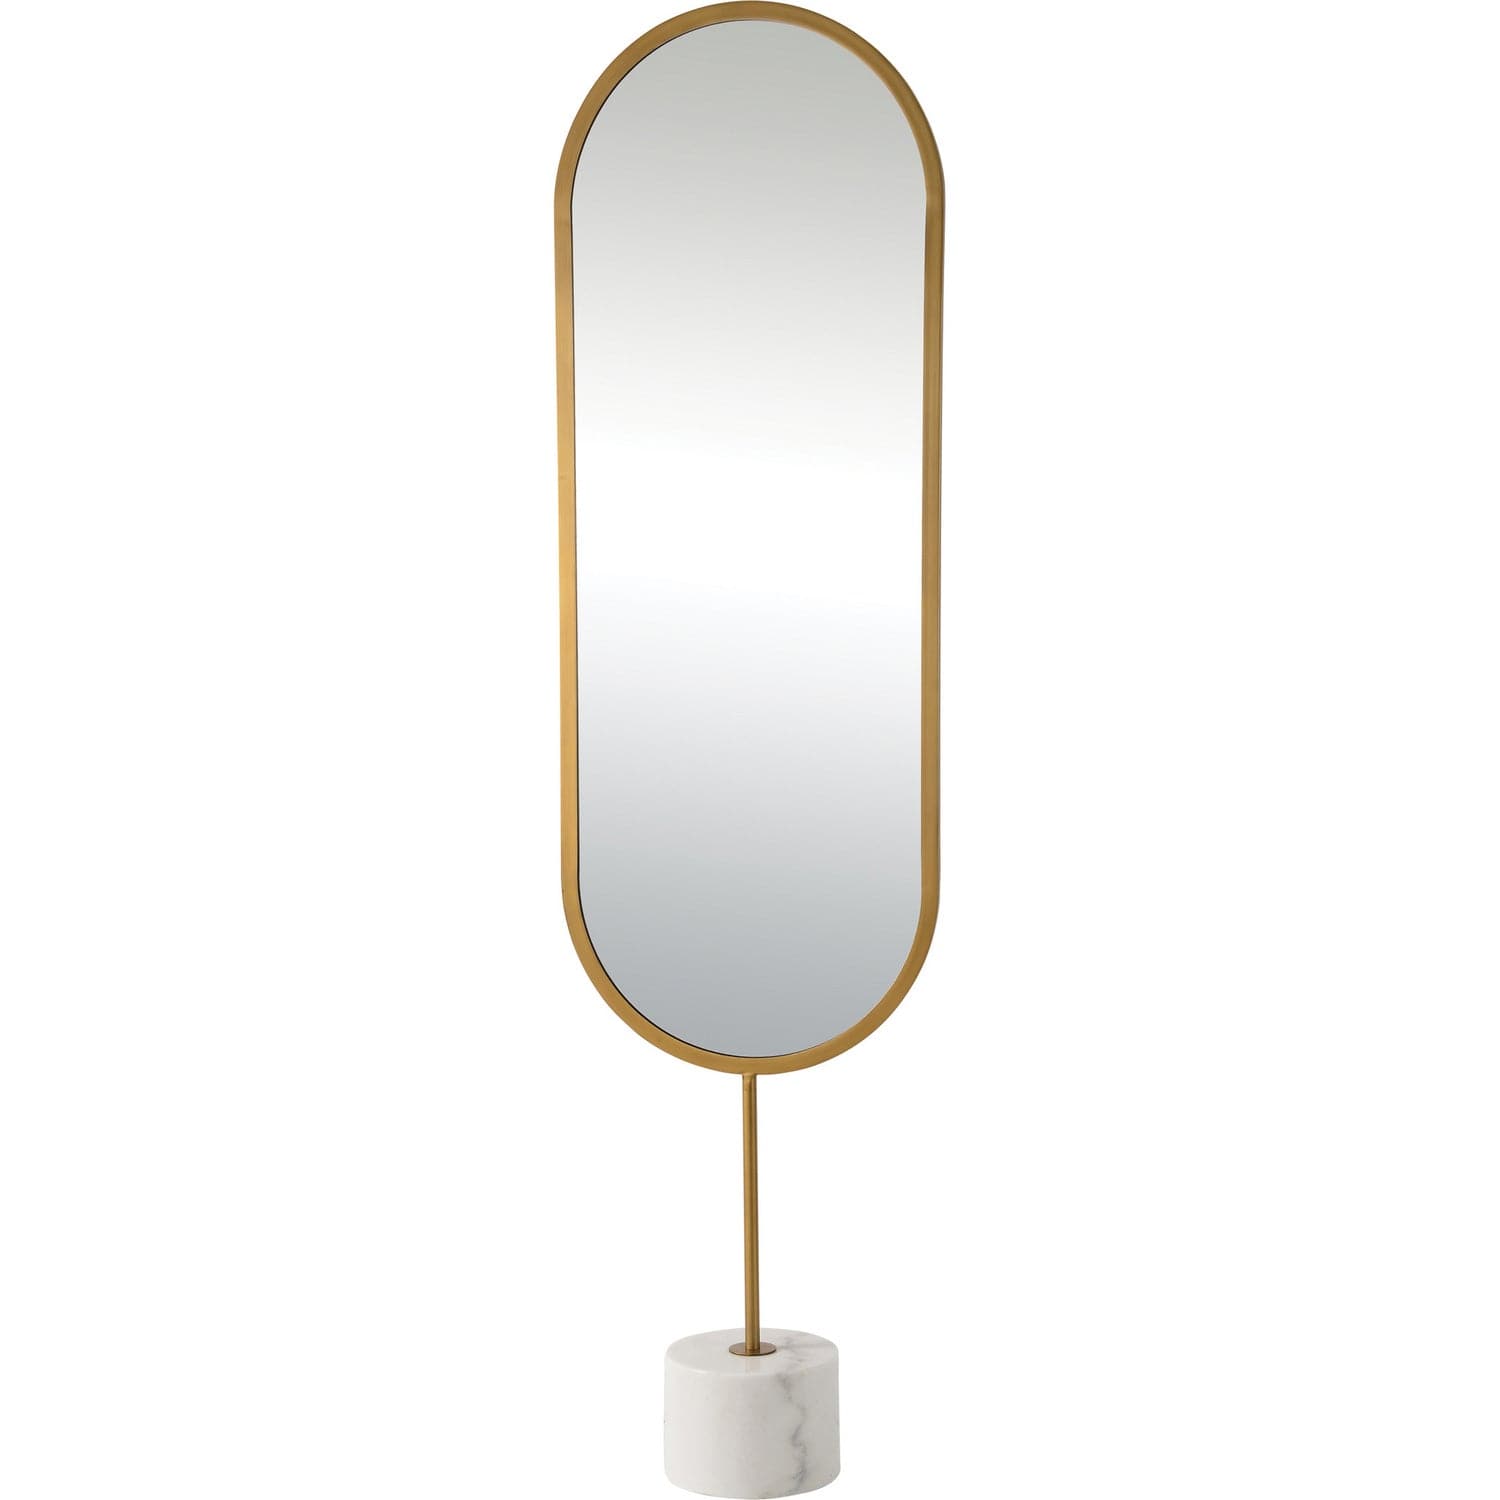 Renwil - MT2341 - Mirrors/Pictures - Mirrors-Oval/Rd.